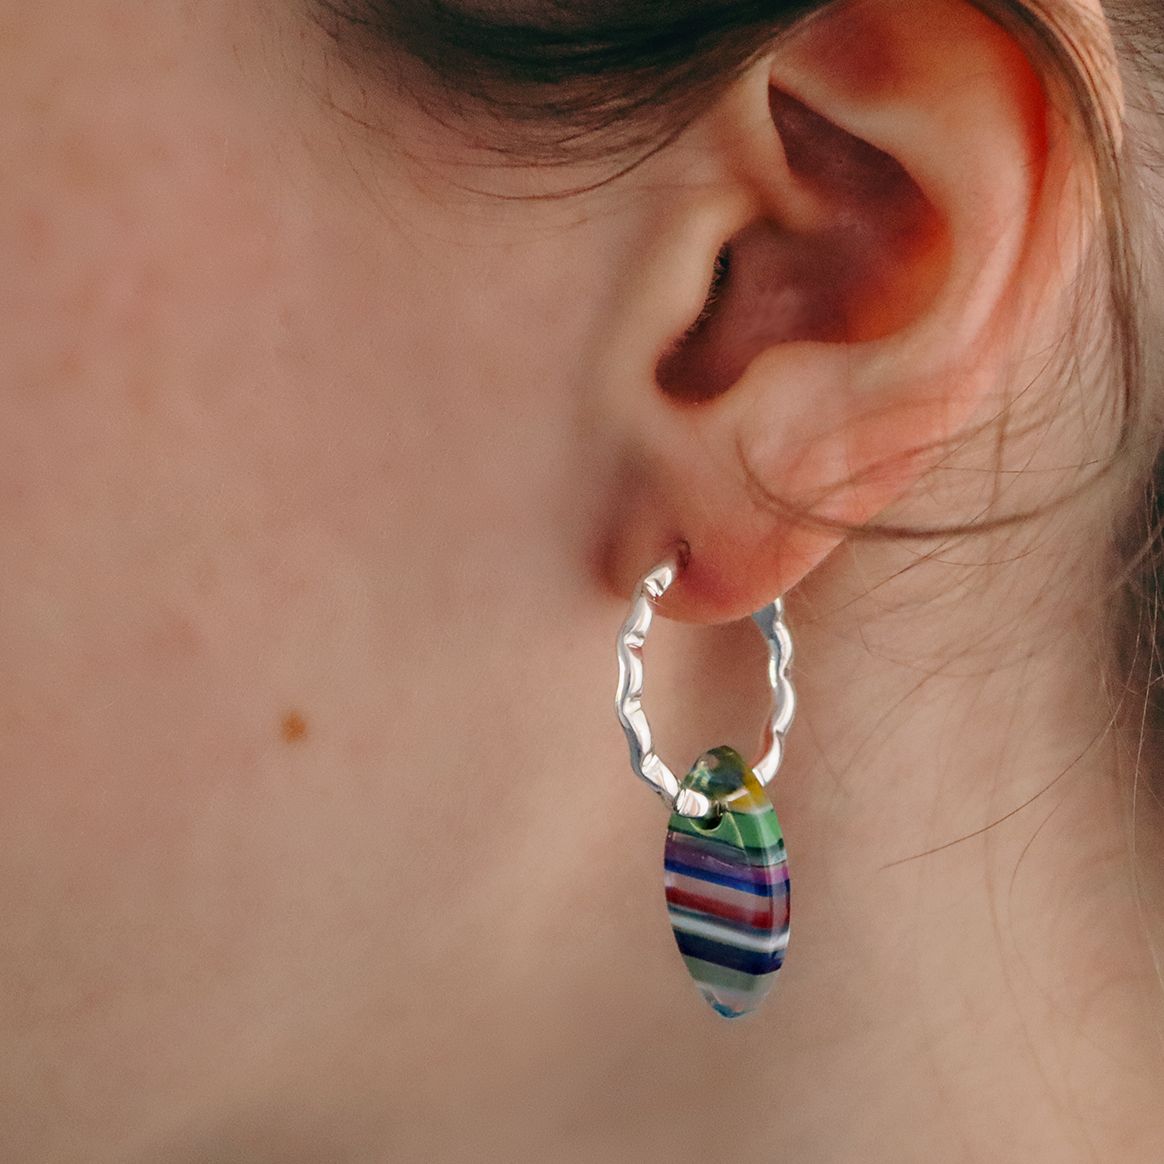 Women wearing a wavy silver hoop with striped Surfite charm hanging off the hoop